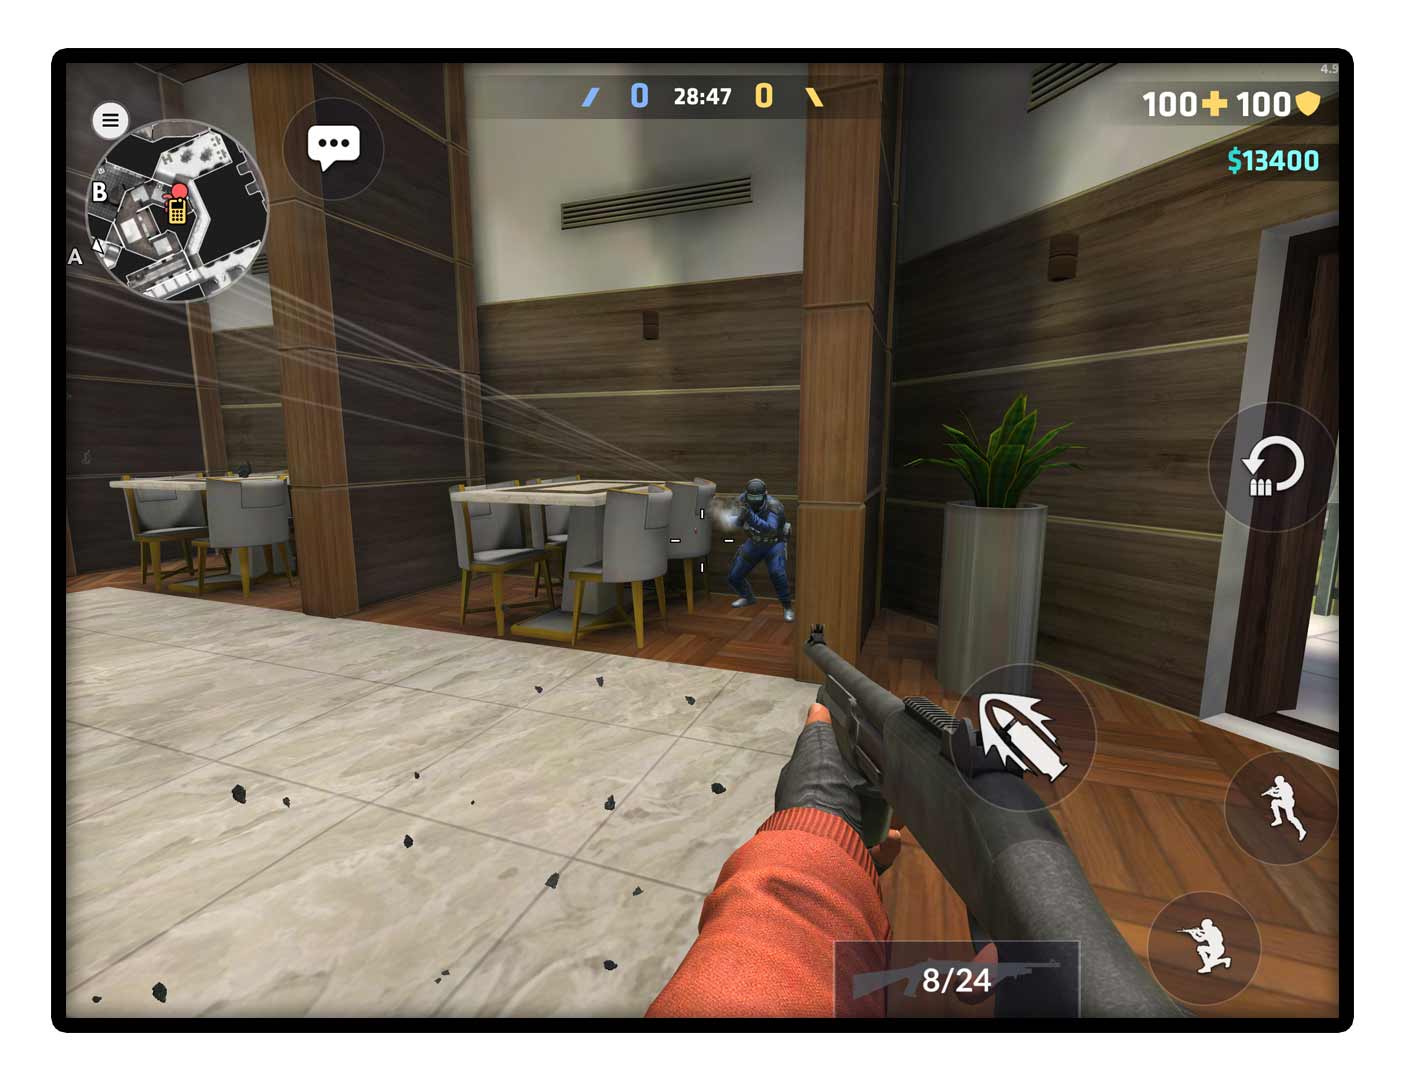 Download Gun Action Strike Critical Ops on PC with MEmu